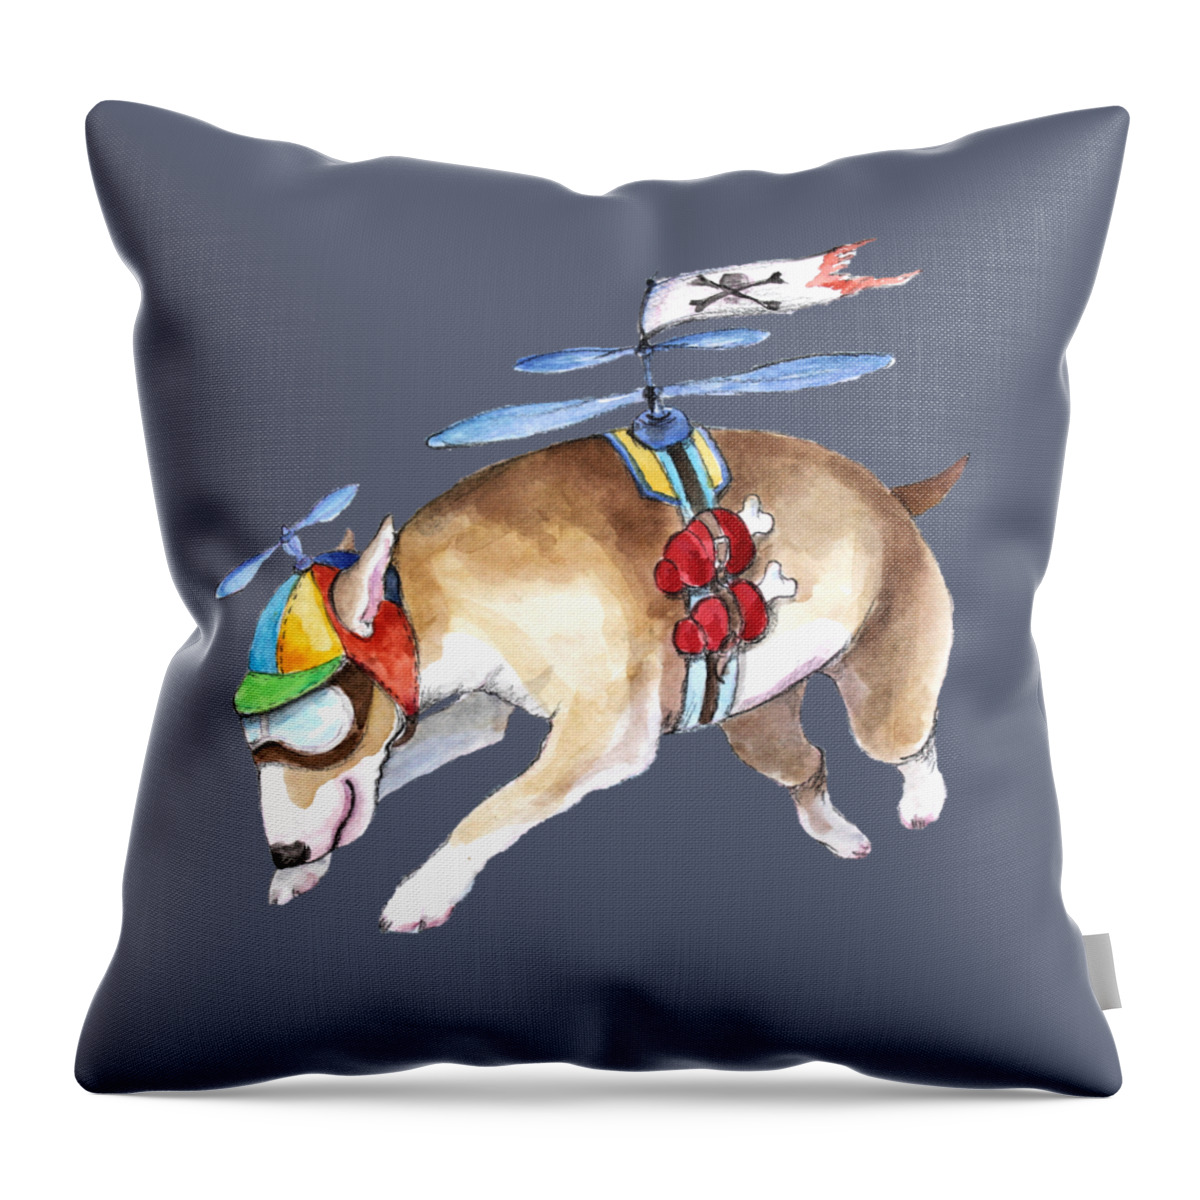 Noewi Throw Pillow featuring the painting Beanie Bully by Jindra Noewi